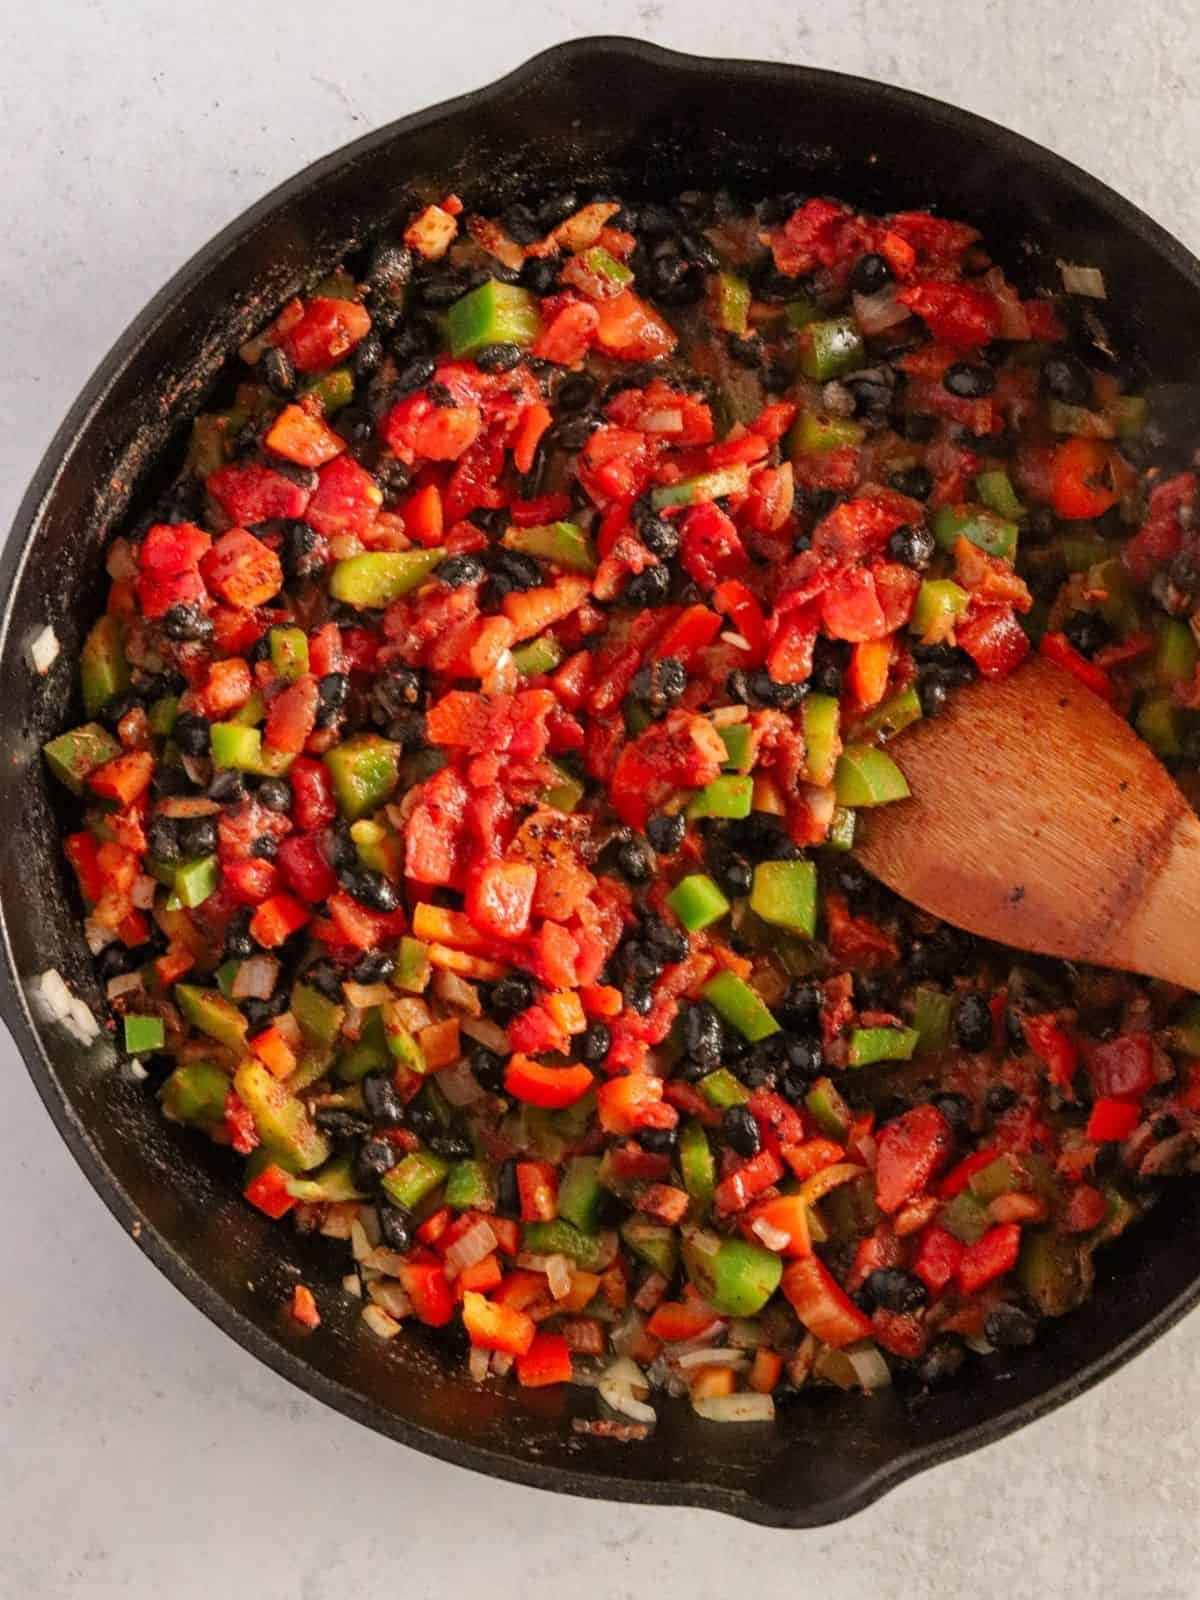 diced vegetables in cast iron skillet